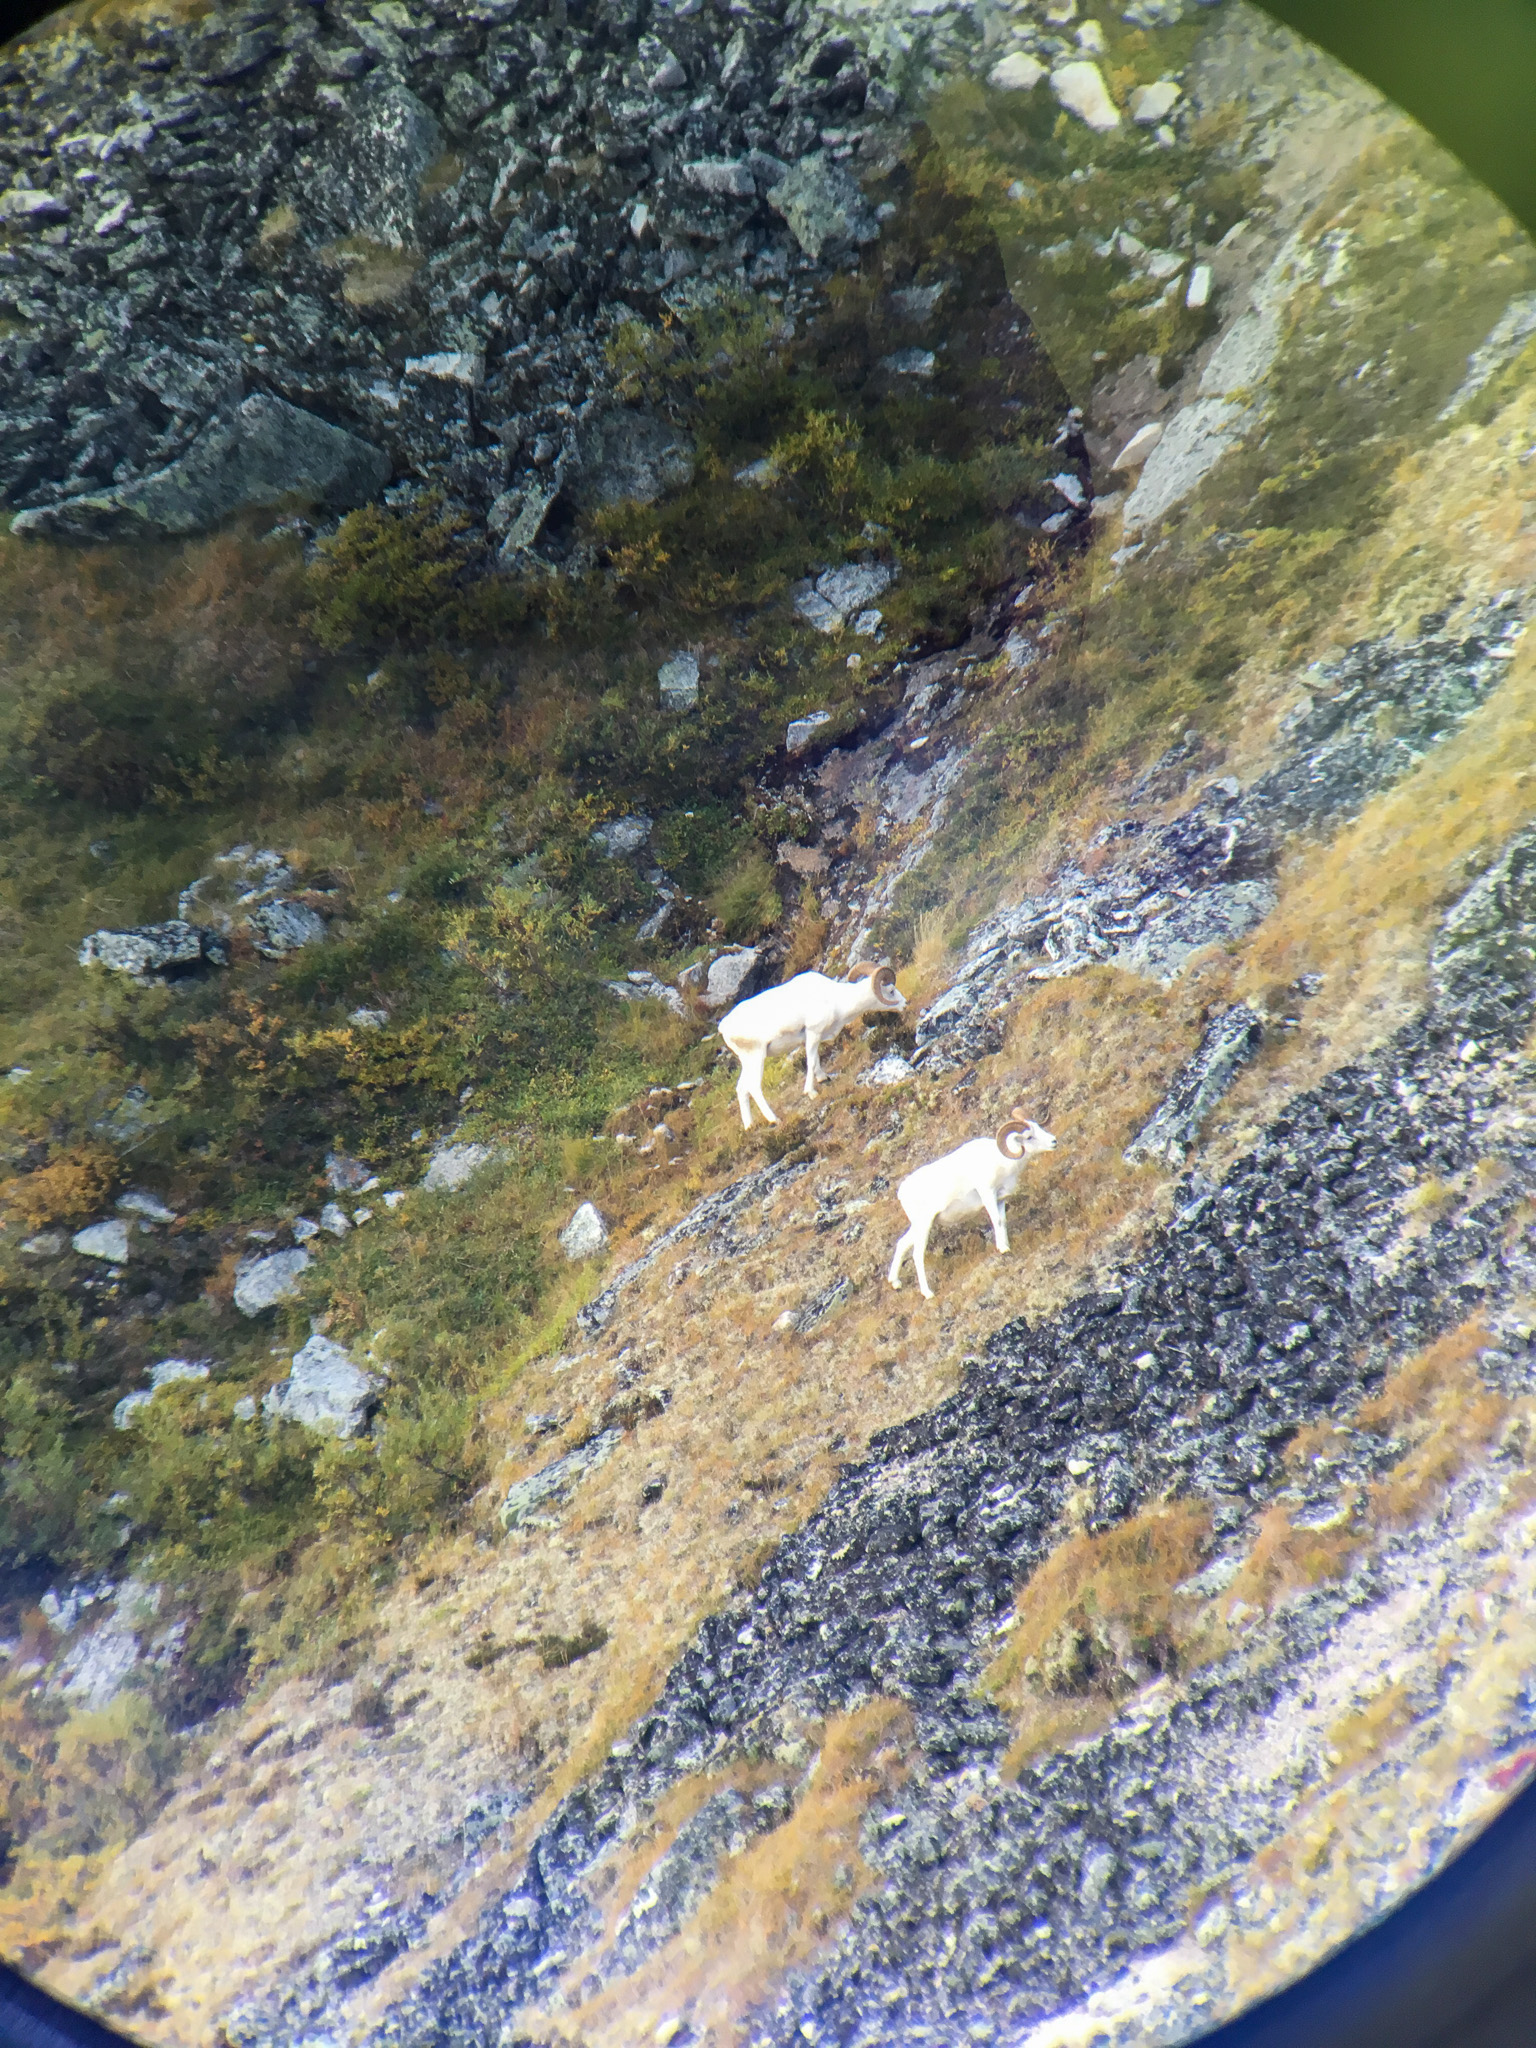 Two dall sheep feed on a mountainside, as viewed through a spotting scope.